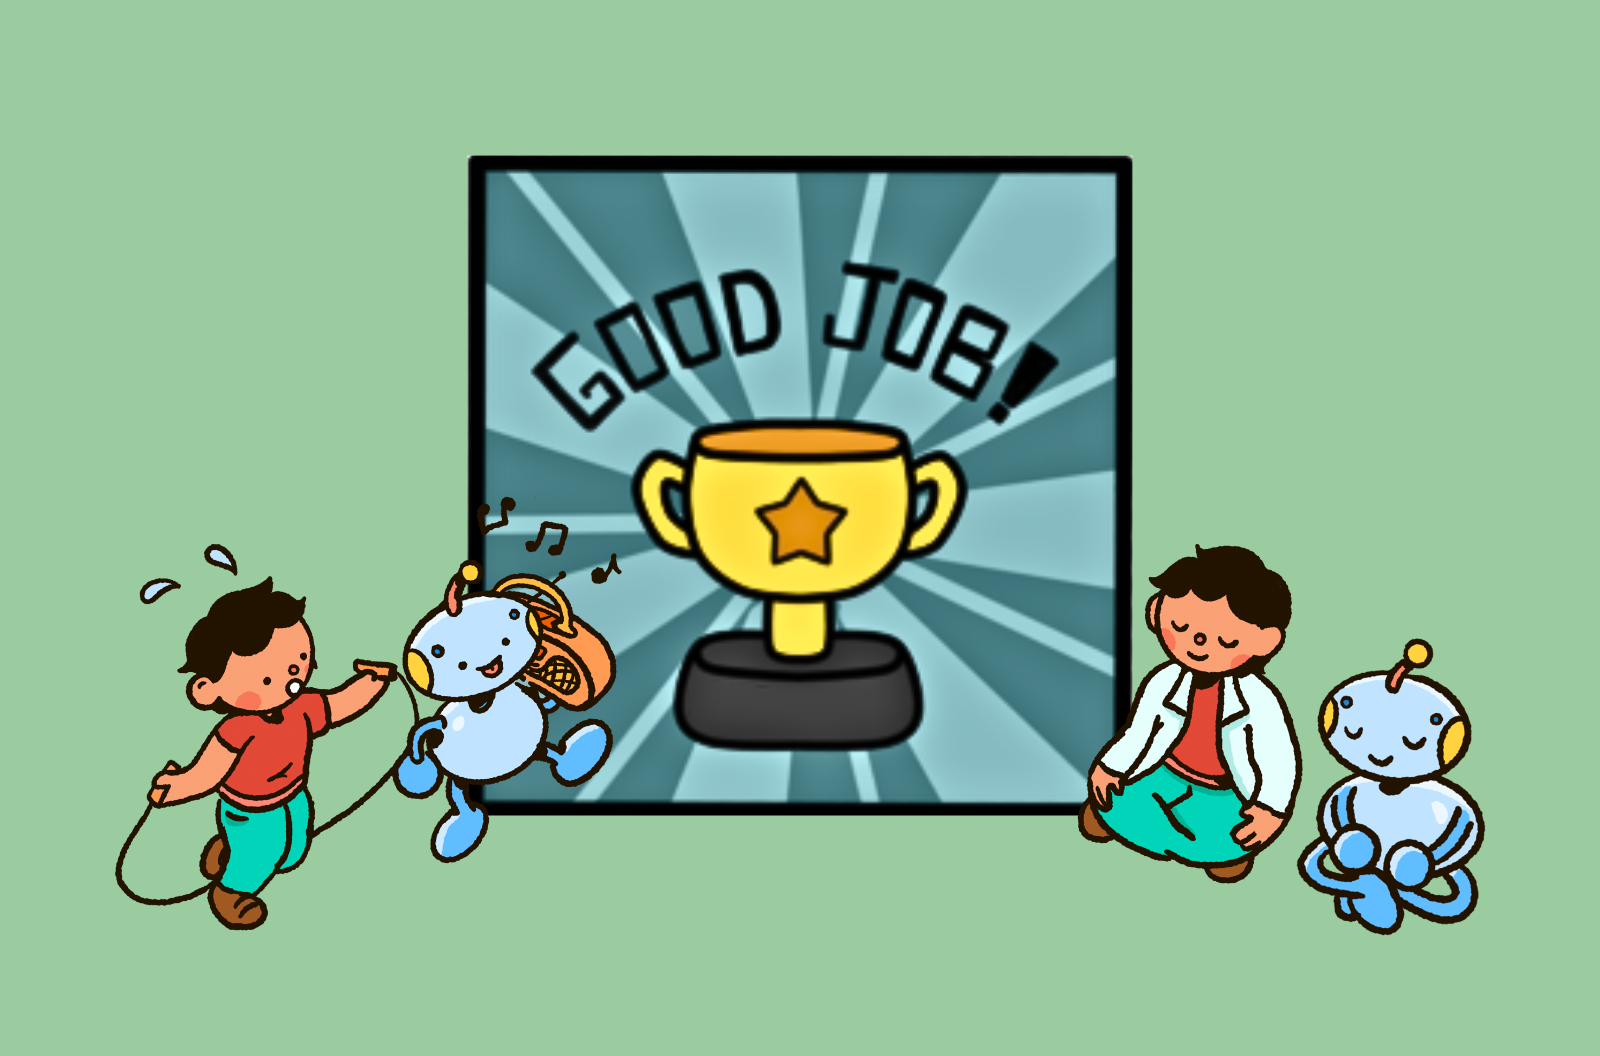 In the center there is a trophy with the words good job above it. On the left are a person jumping rope and a robot dancing. To the right are a person and a robot sitting cross-legged and smiling.